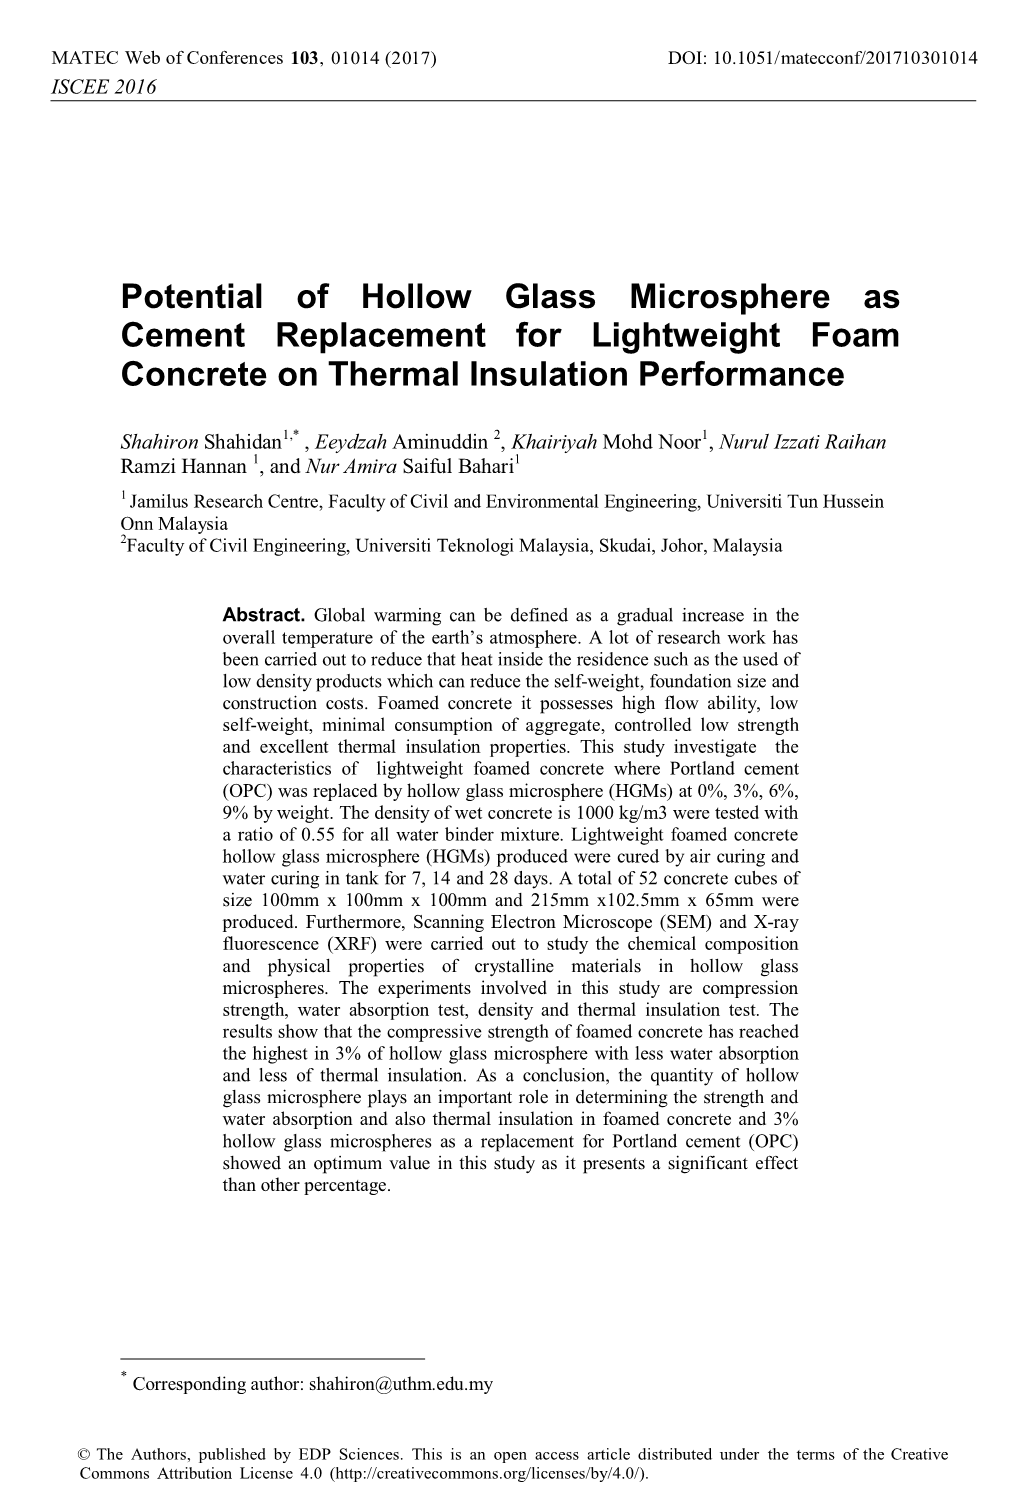 Potential of Hollow Glass Microsphere As Cement Replacement for Lightweight Foam Concrete on Thermal Insulation Performance